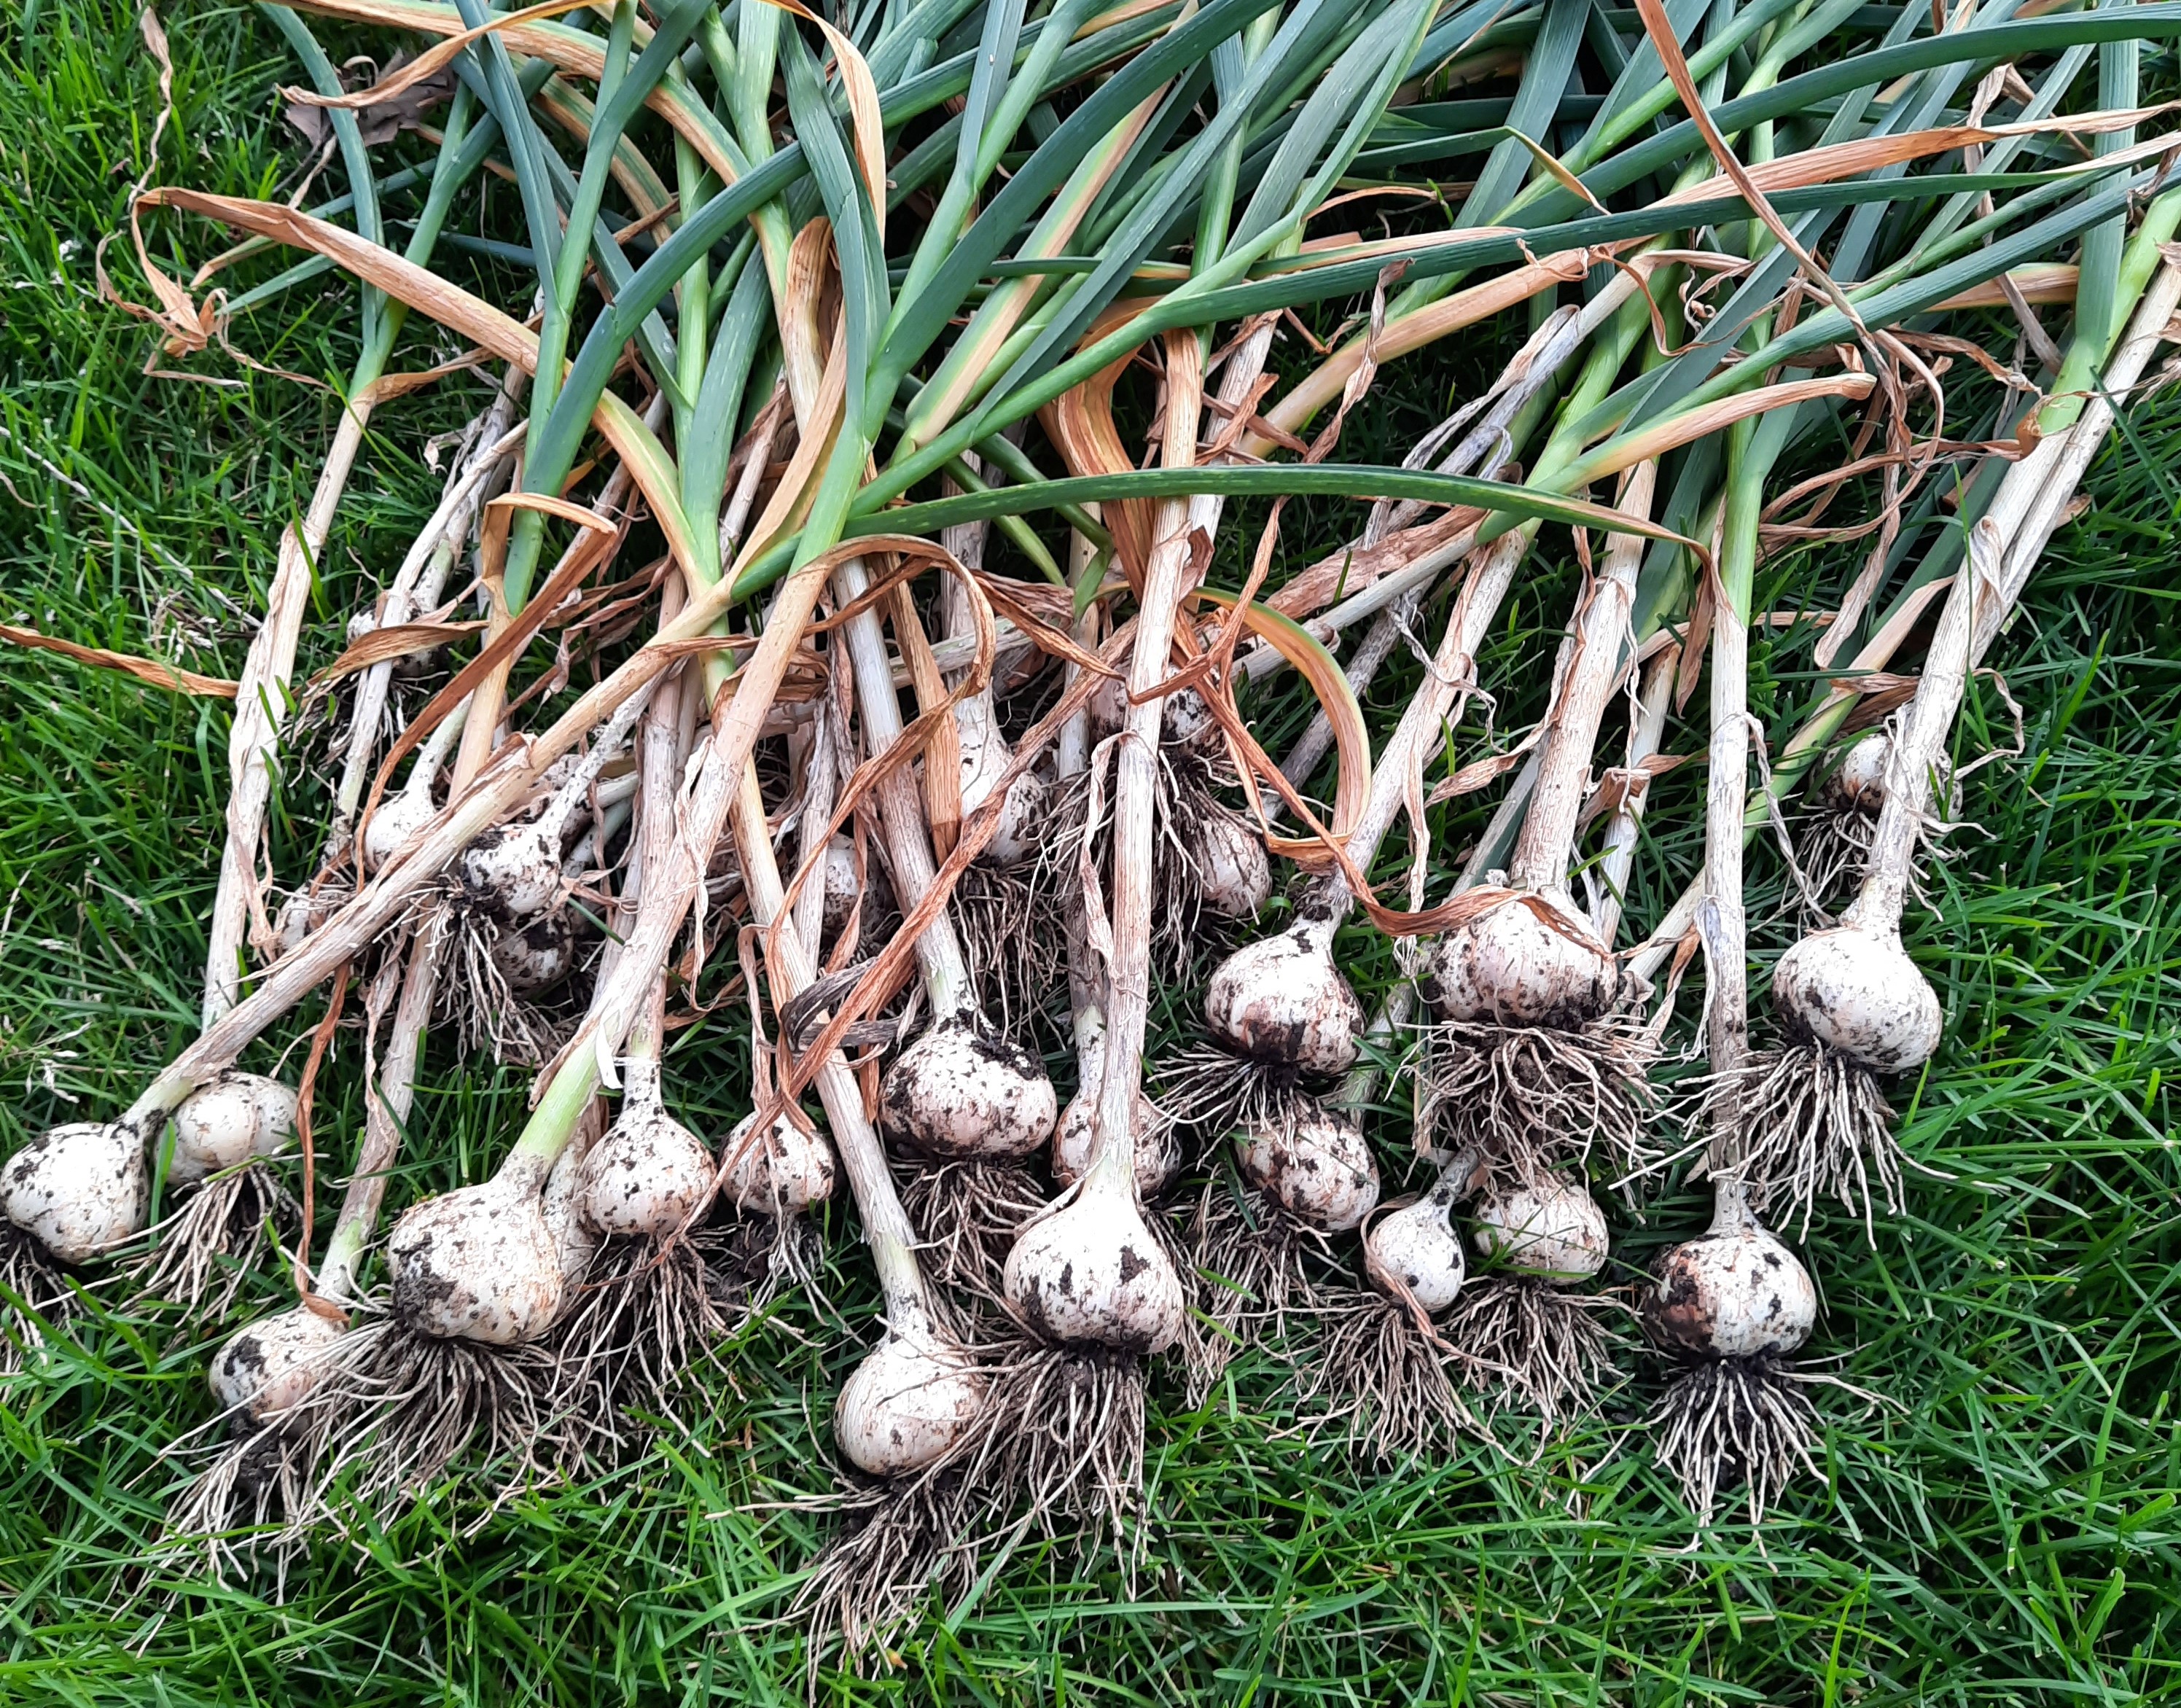 Several newly-harvested garlic plants laid out on the grass